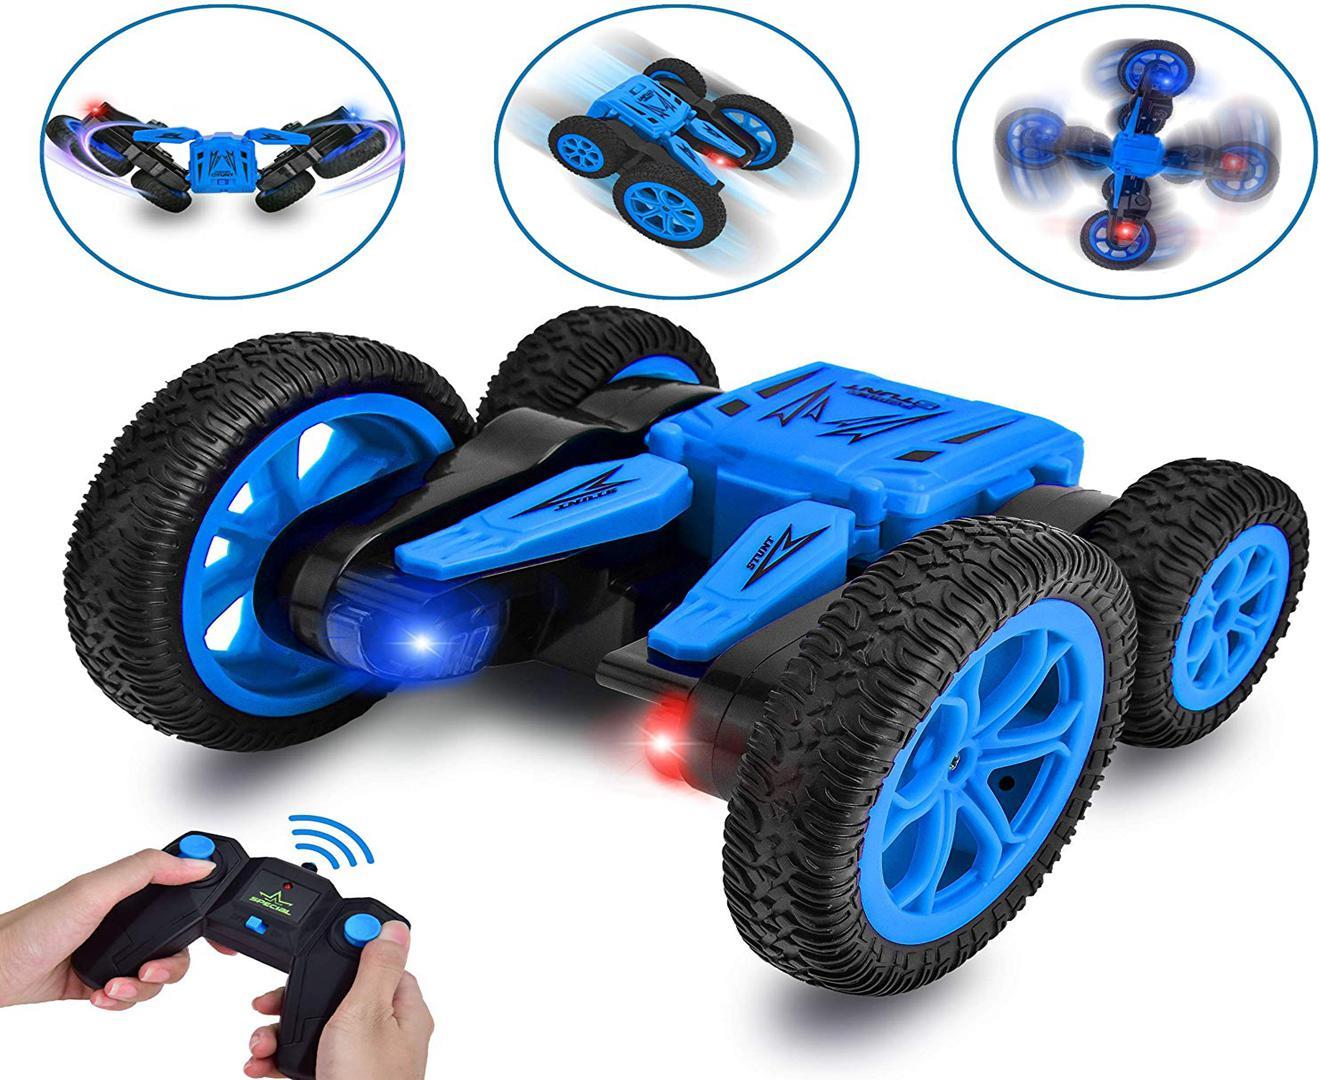 Remote Control Car RC Stunt Car Toys for 6-12 Years Old Boys Gift, 2.4Ghz 360°Flips Double Sided Rotating Tumbling Race Car Vehicles Kids Toy Cars